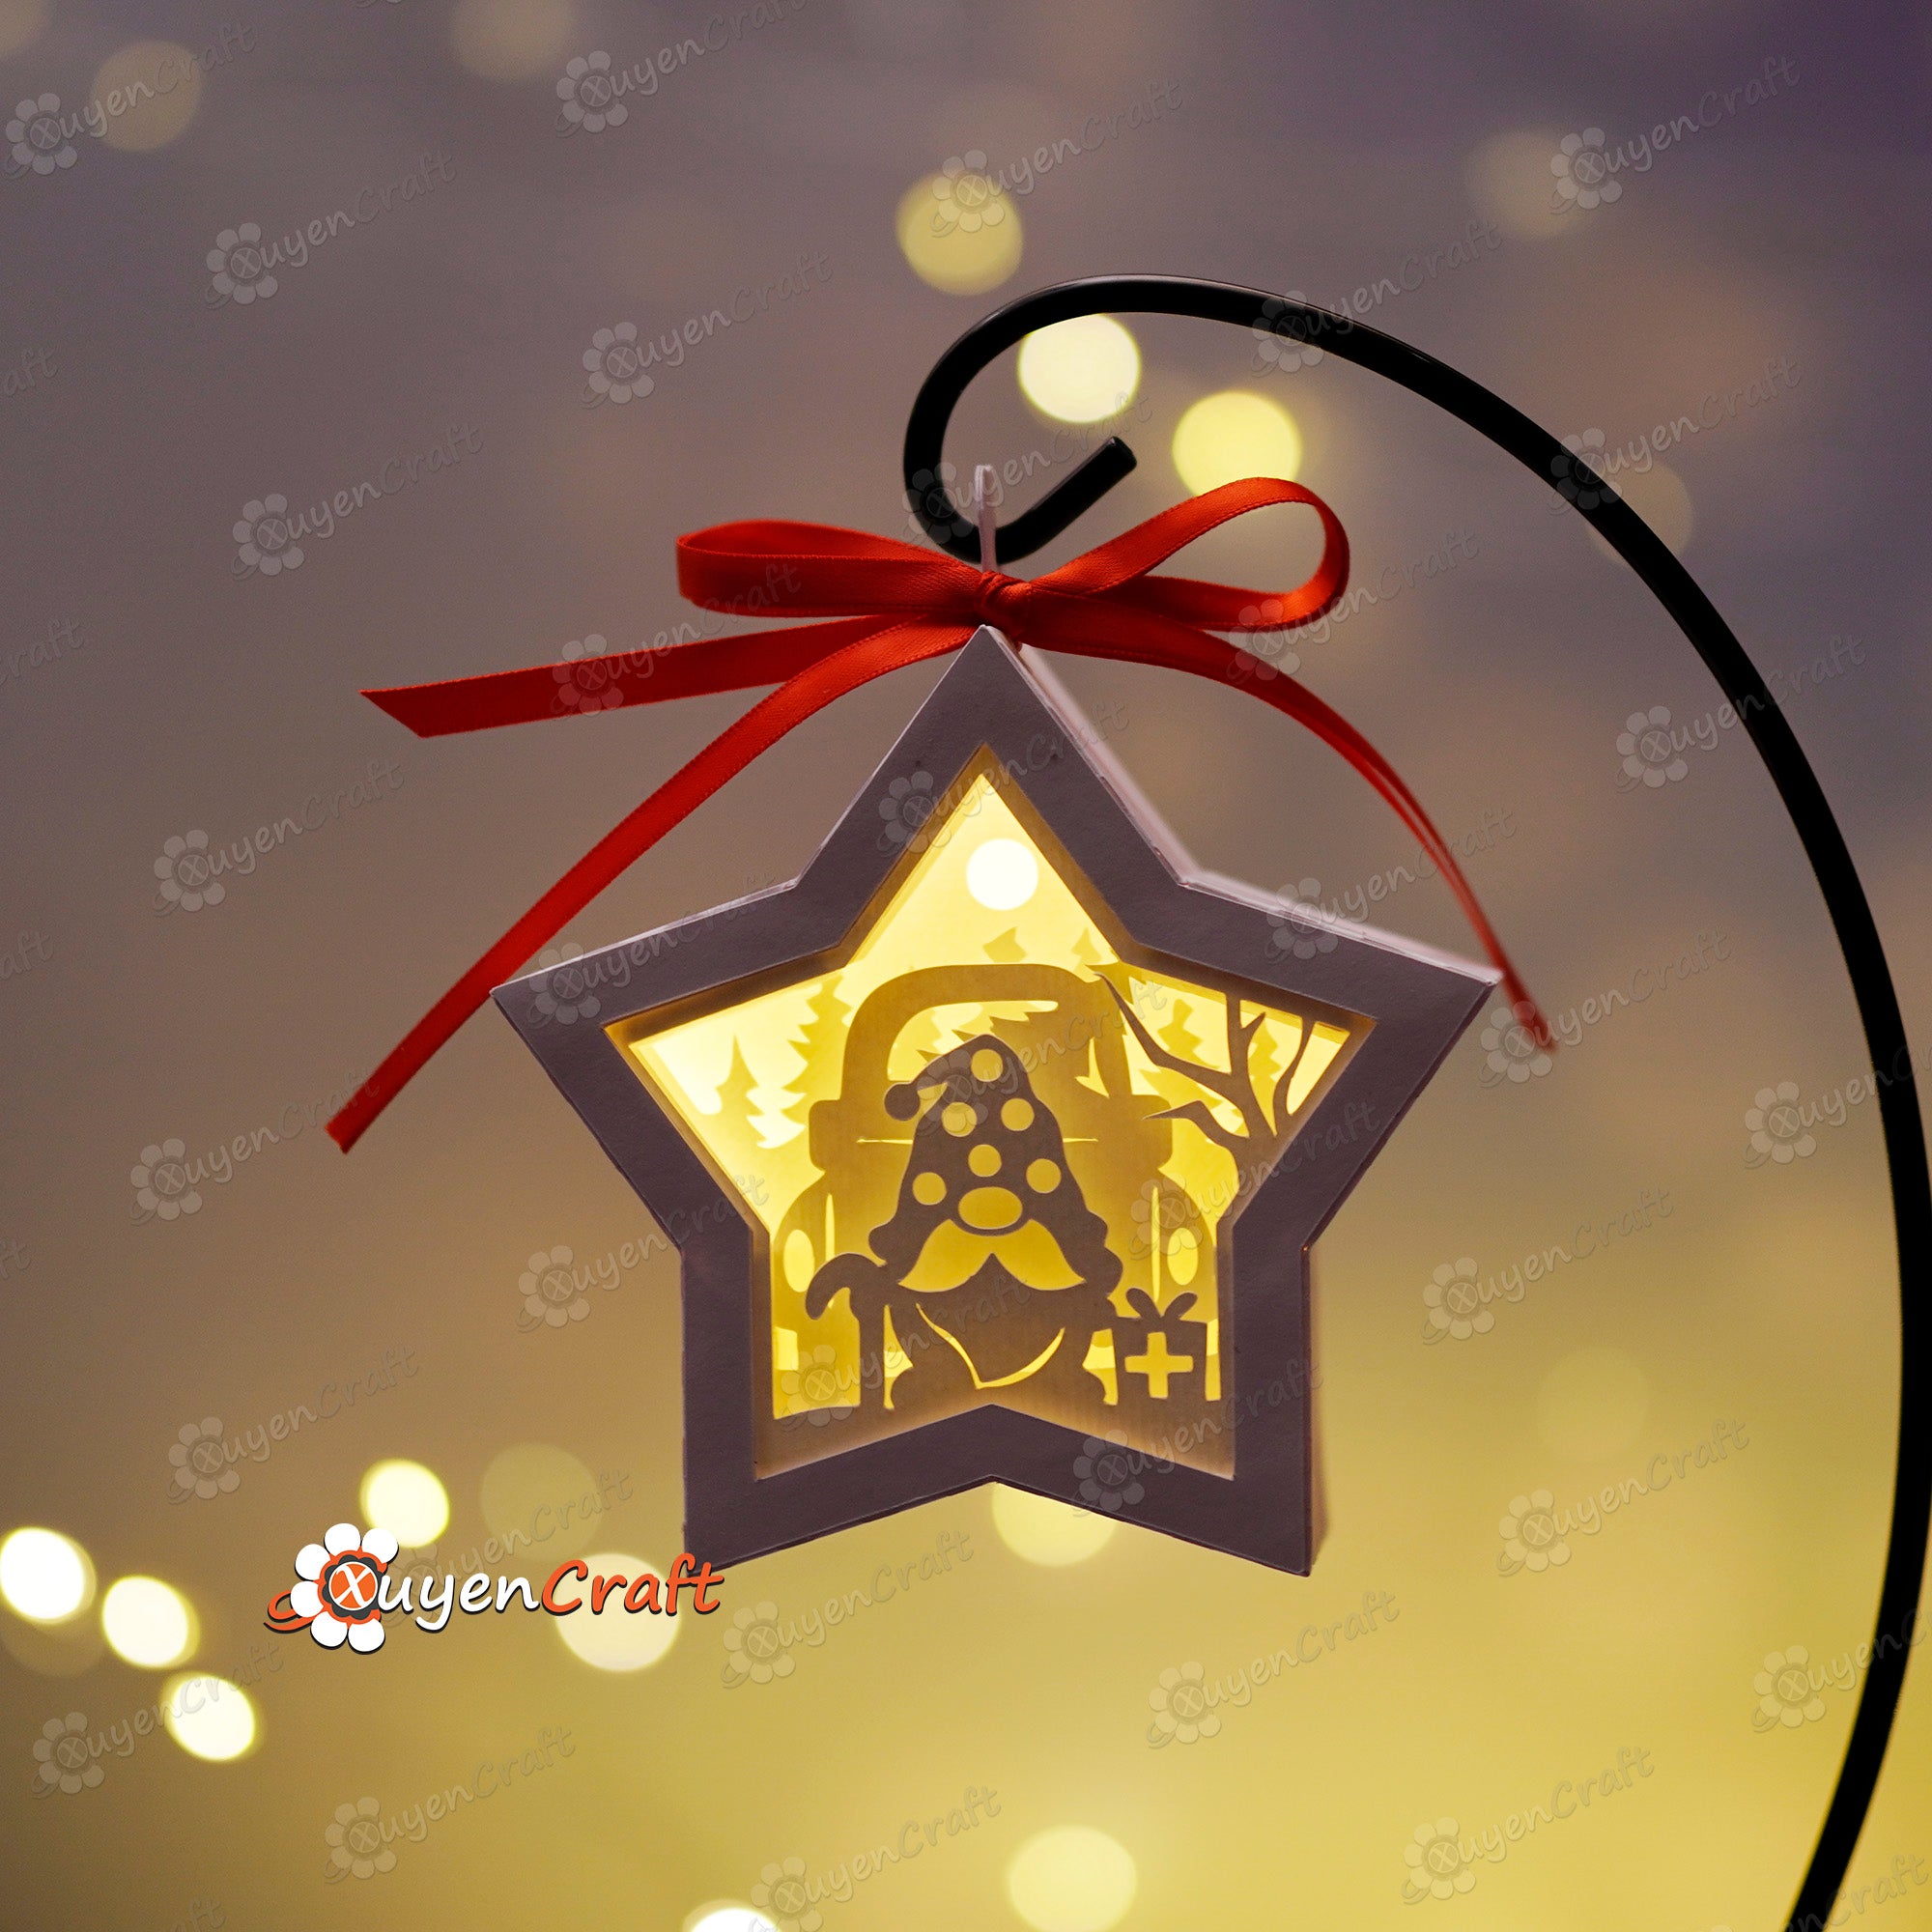 Gnome Small Star Ornaments SVG for Cricut Joy, ScanNcut, Cameo - Merry Christmas Hanging Star Lantern Shadow Box SVG Template